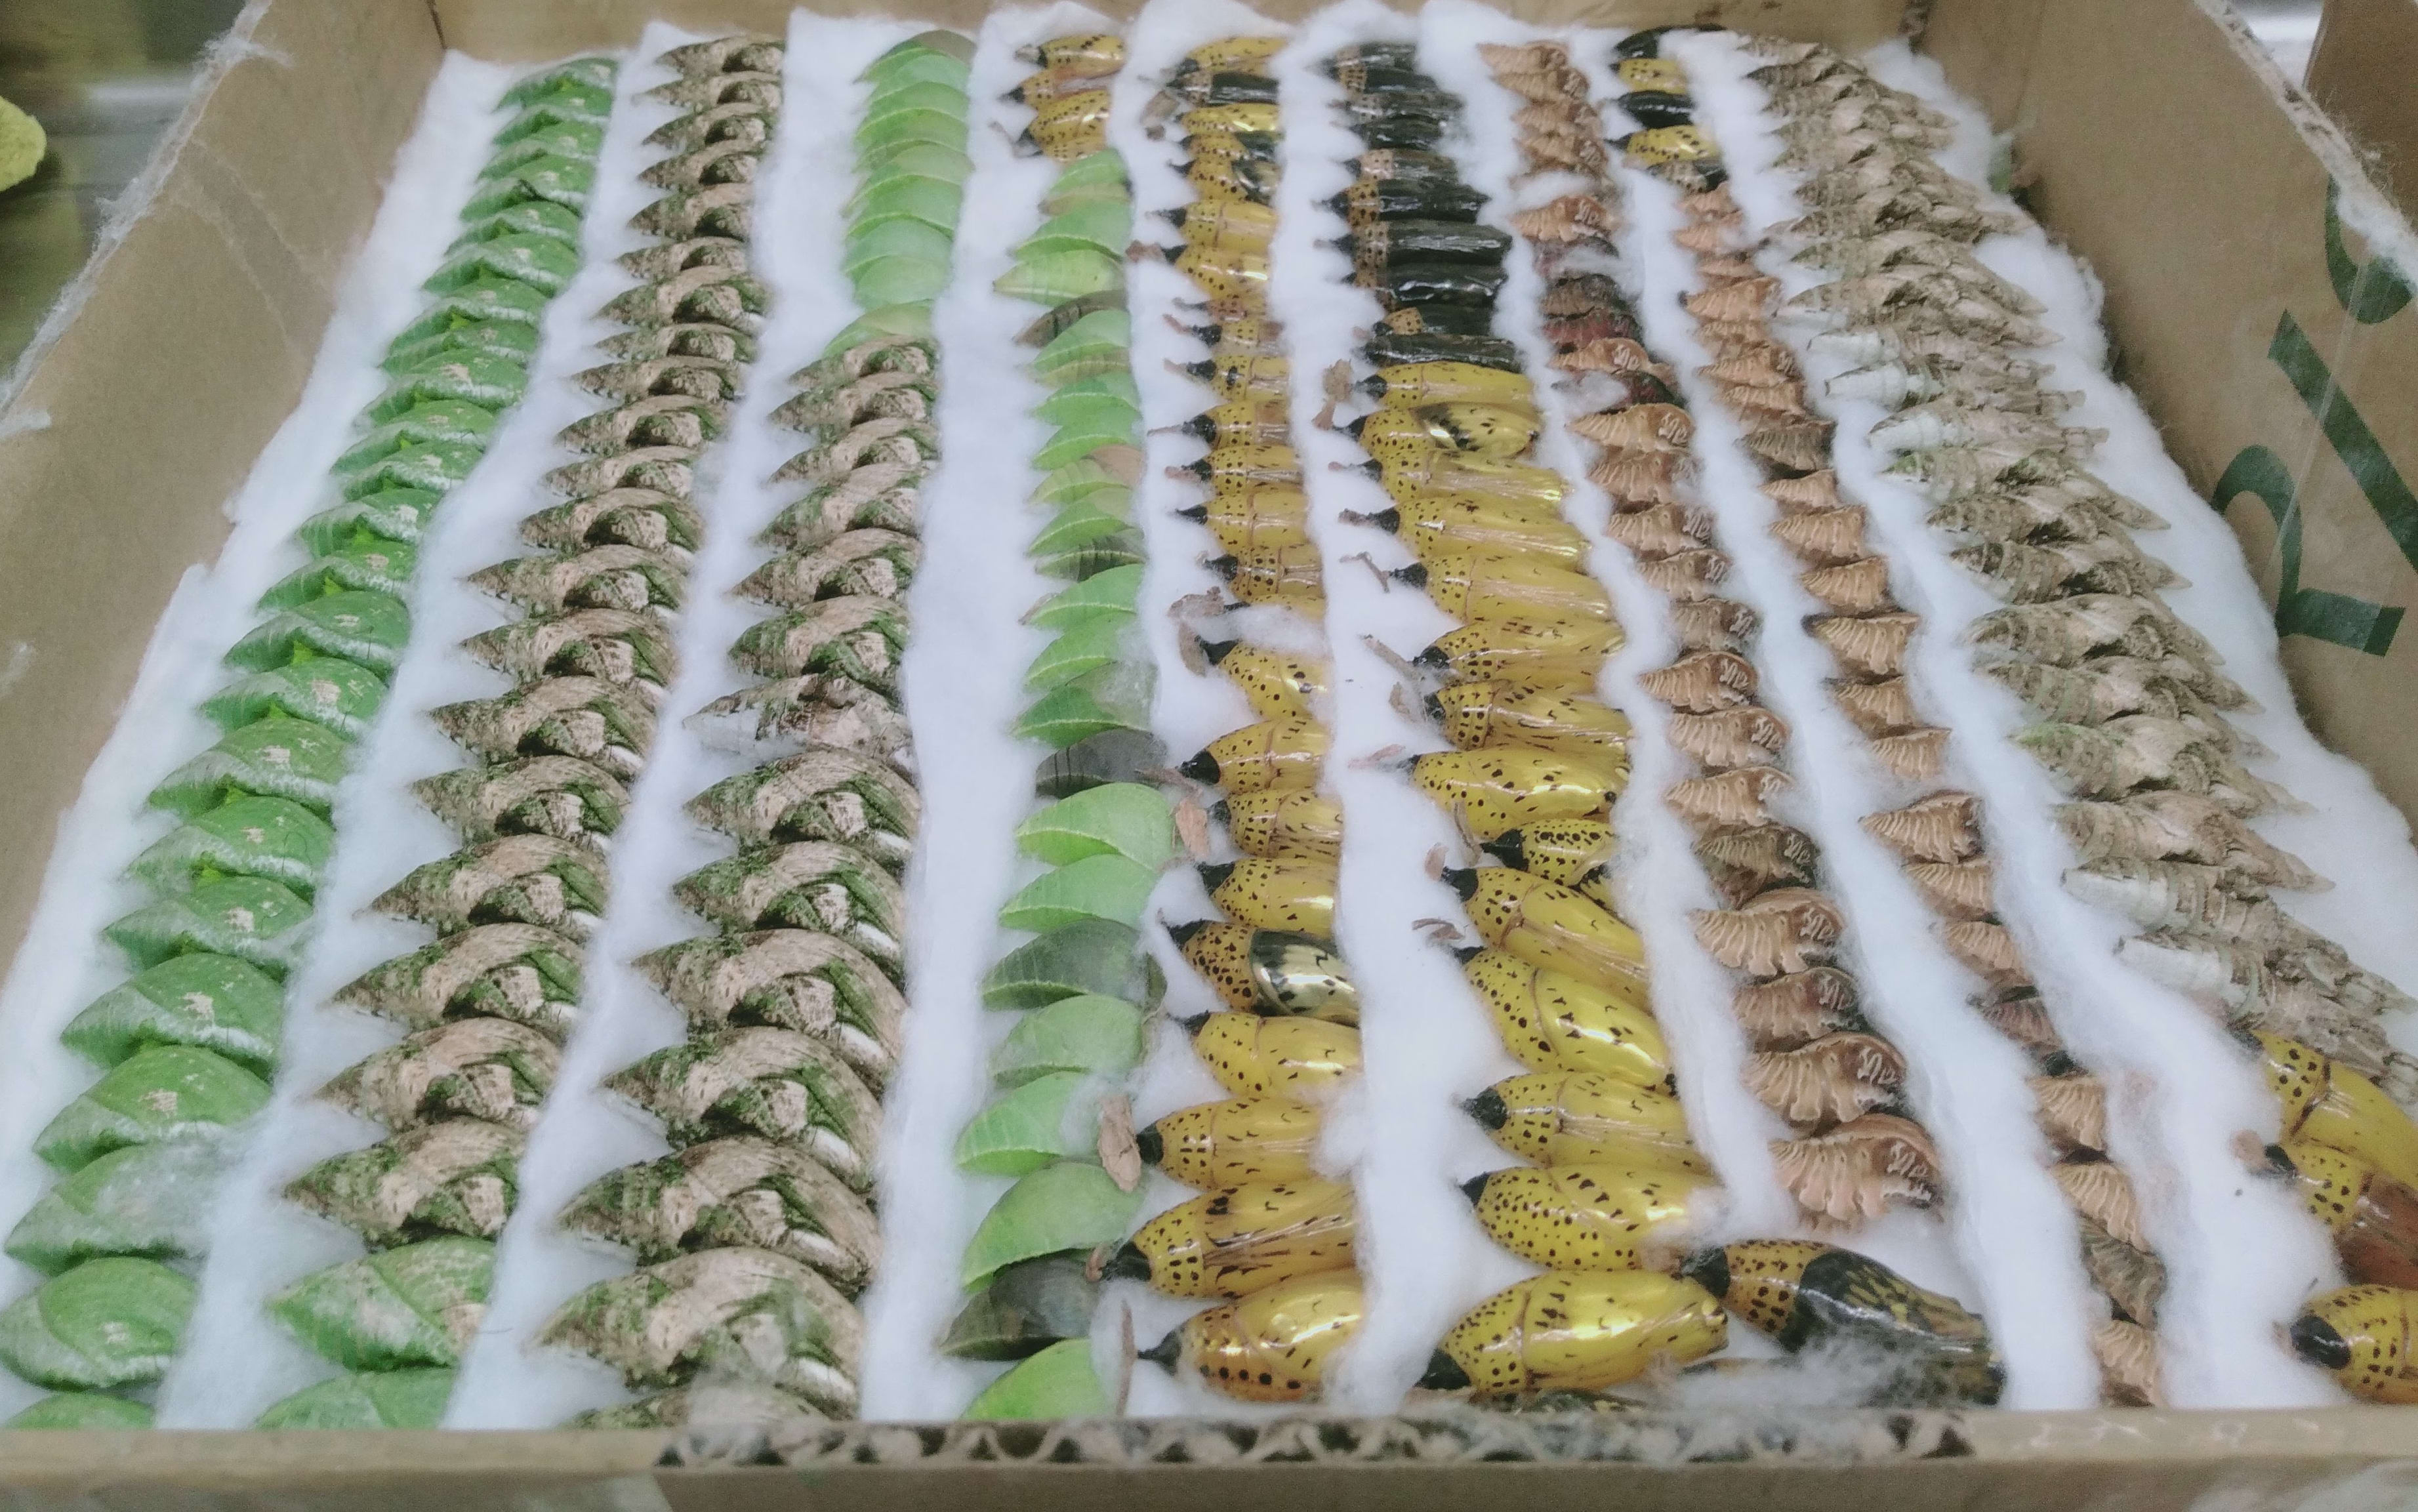 Butterfly pupae are laid out in a cardboard box on top of some cotton wool. They are in lines, there are different colours and sizes of them from green to brown to yellow.